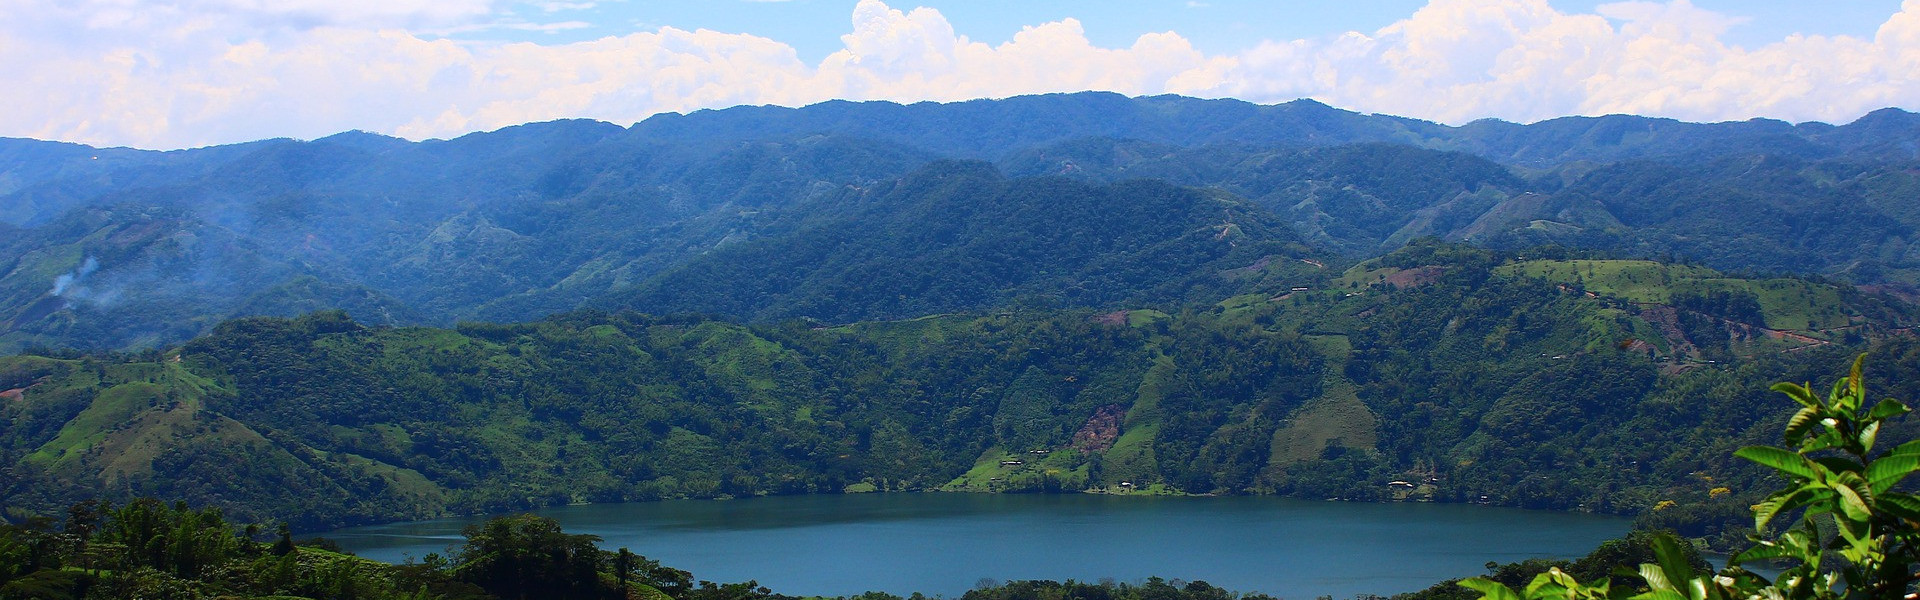 Destination image of Colombia